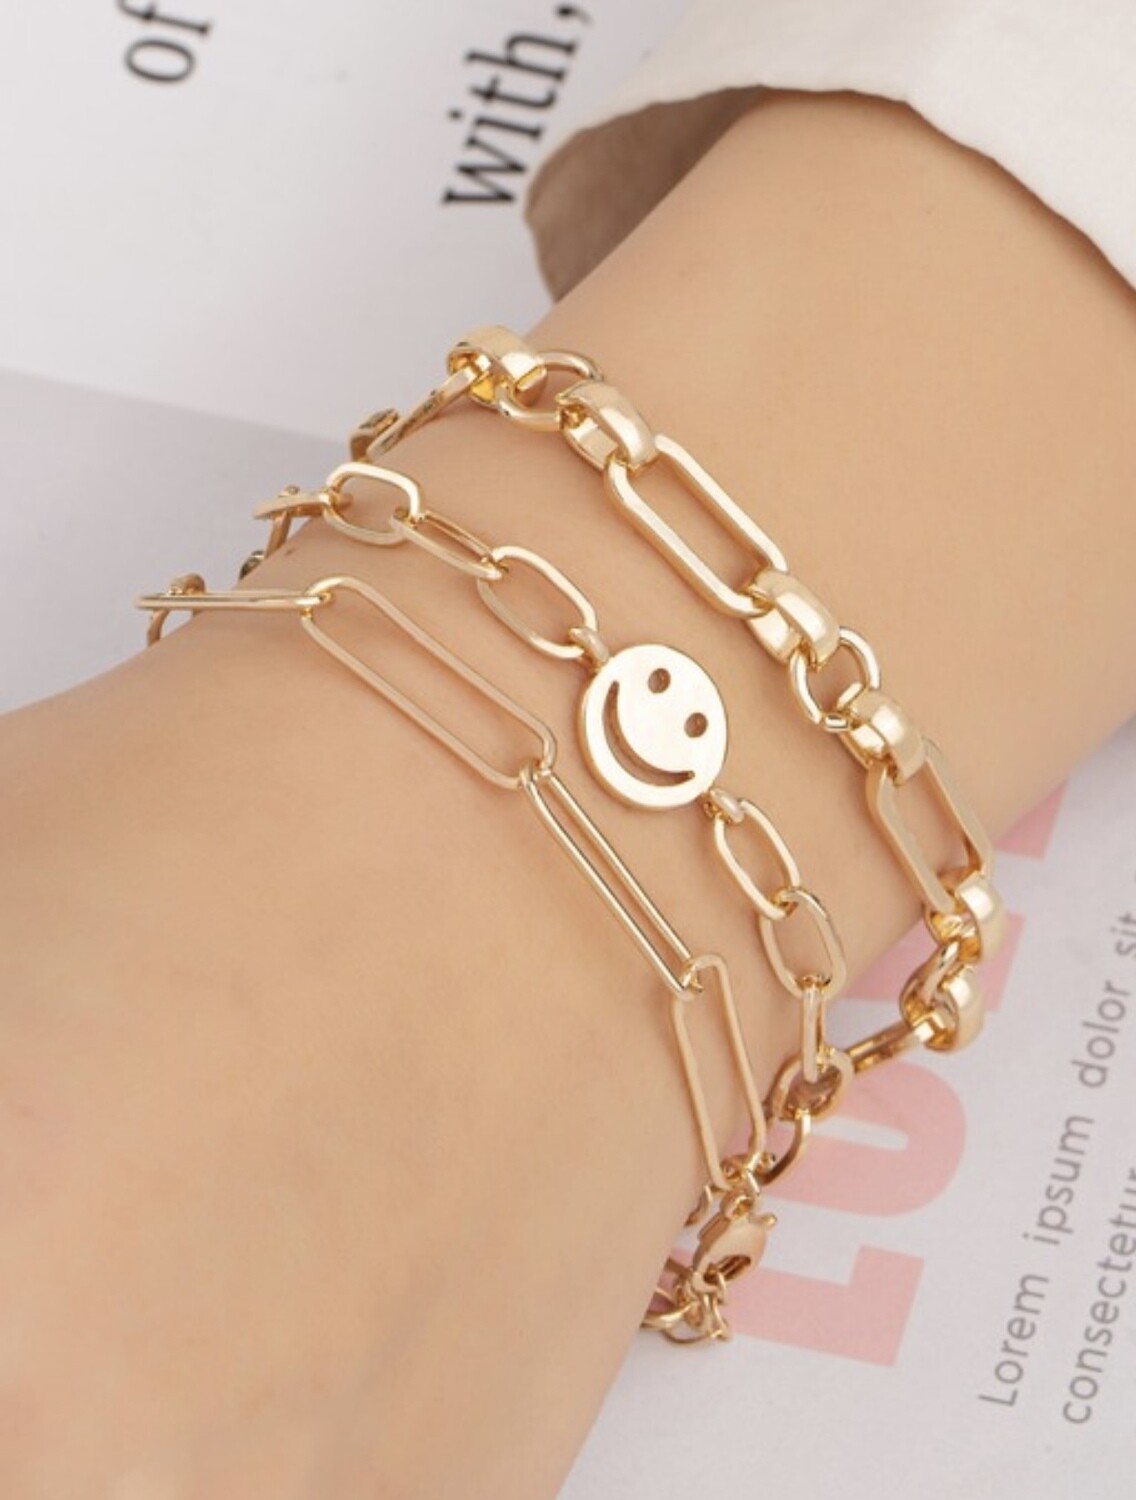 Three Link Chain Bracelet Set with Smiley Face Charm, Gold